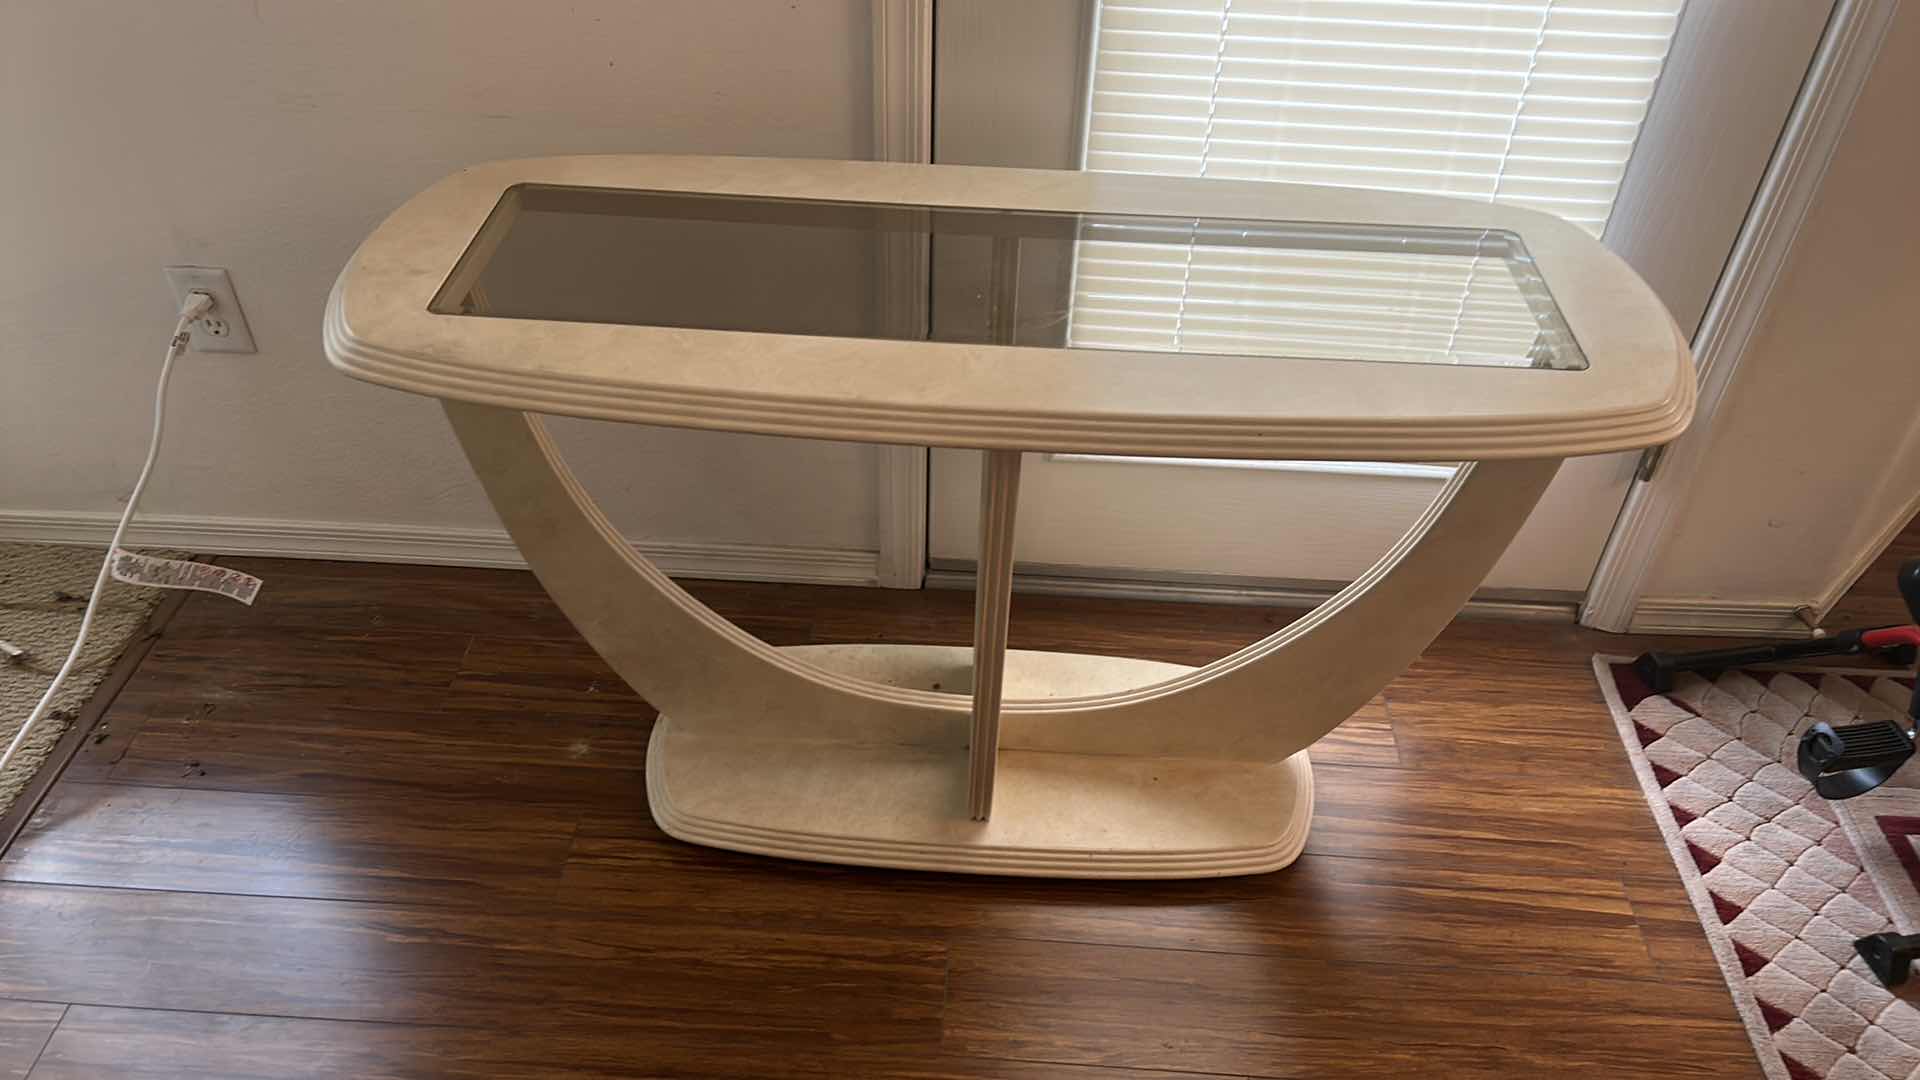 Photo 5 of CONTEMPORARY CREAM ENTRY TABLE, METAL W GLASS TOP 49” x 20” x 27”